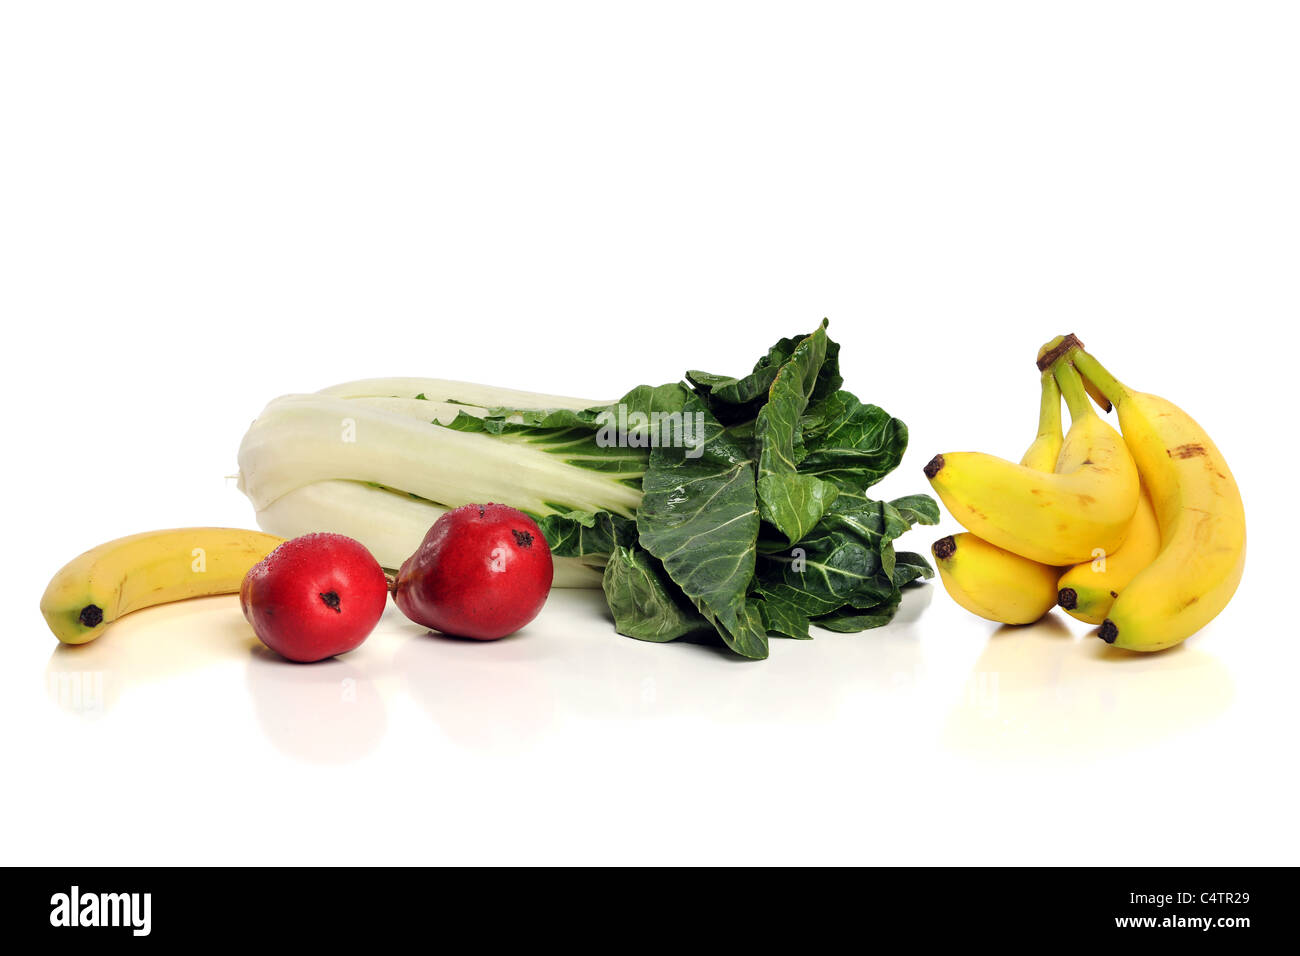 Fruits and vegetables over white background with reflections Stock Photo